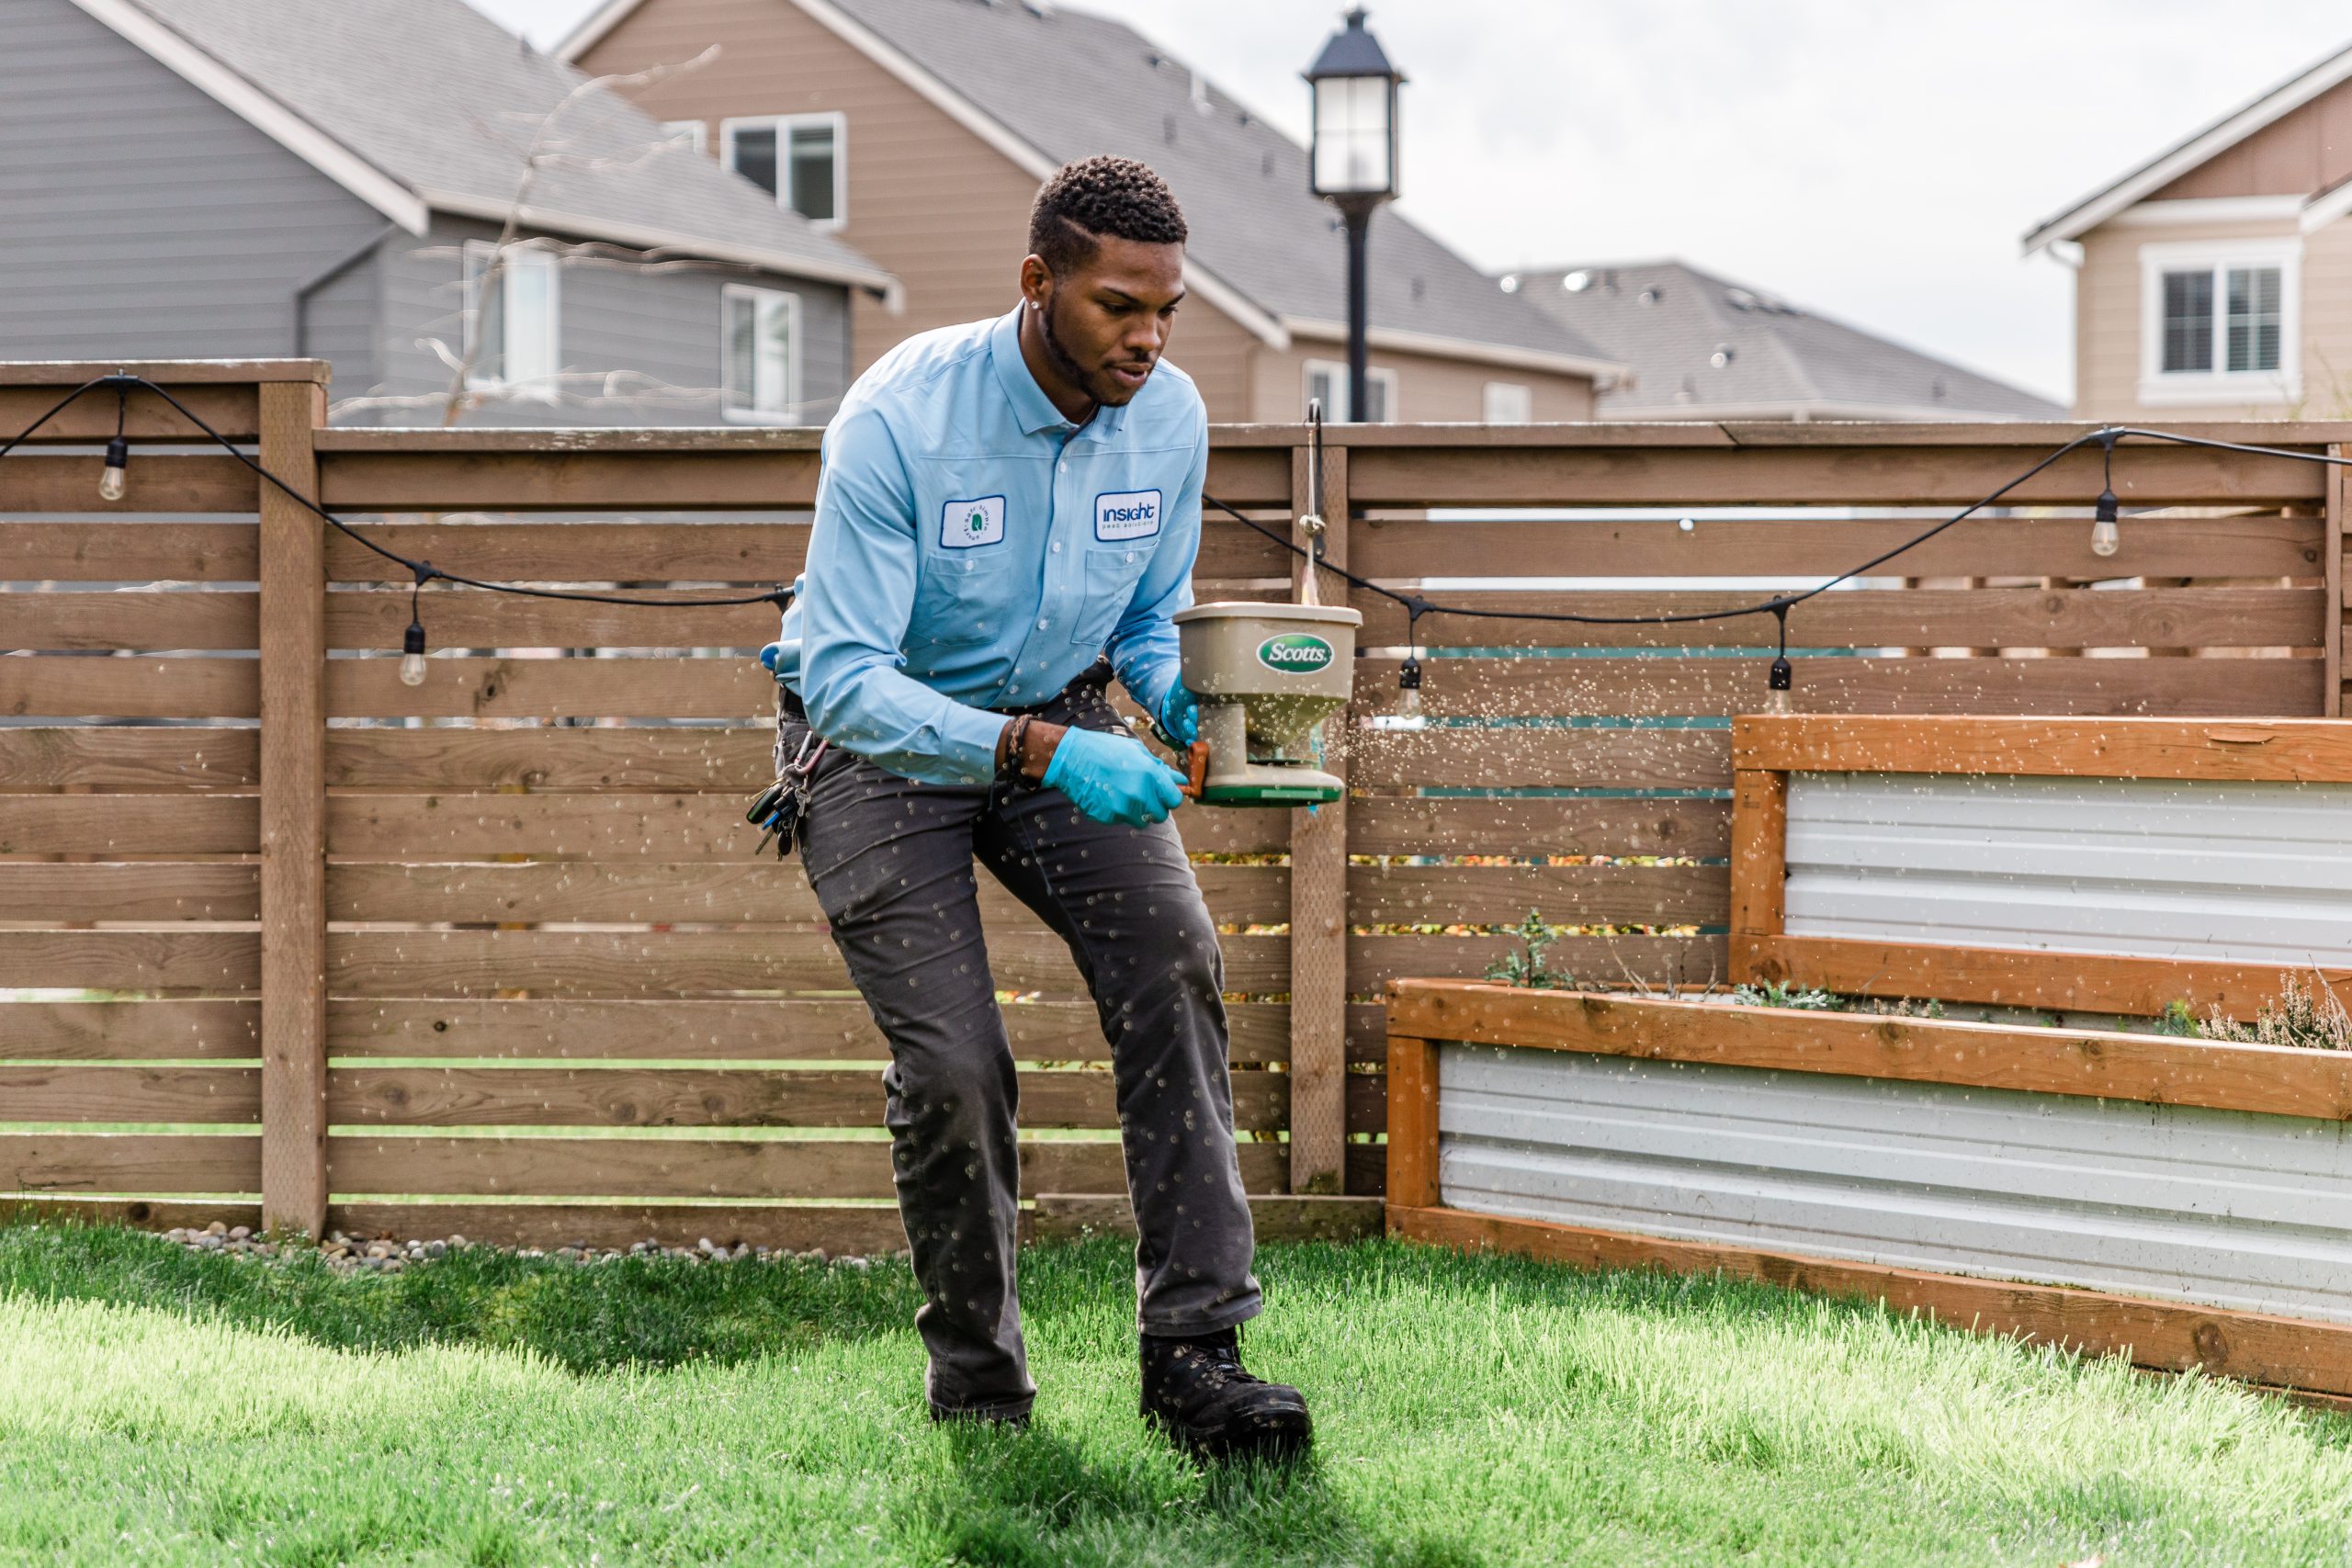 6 Ways to Keep Your Yard Tidy and Pests Away